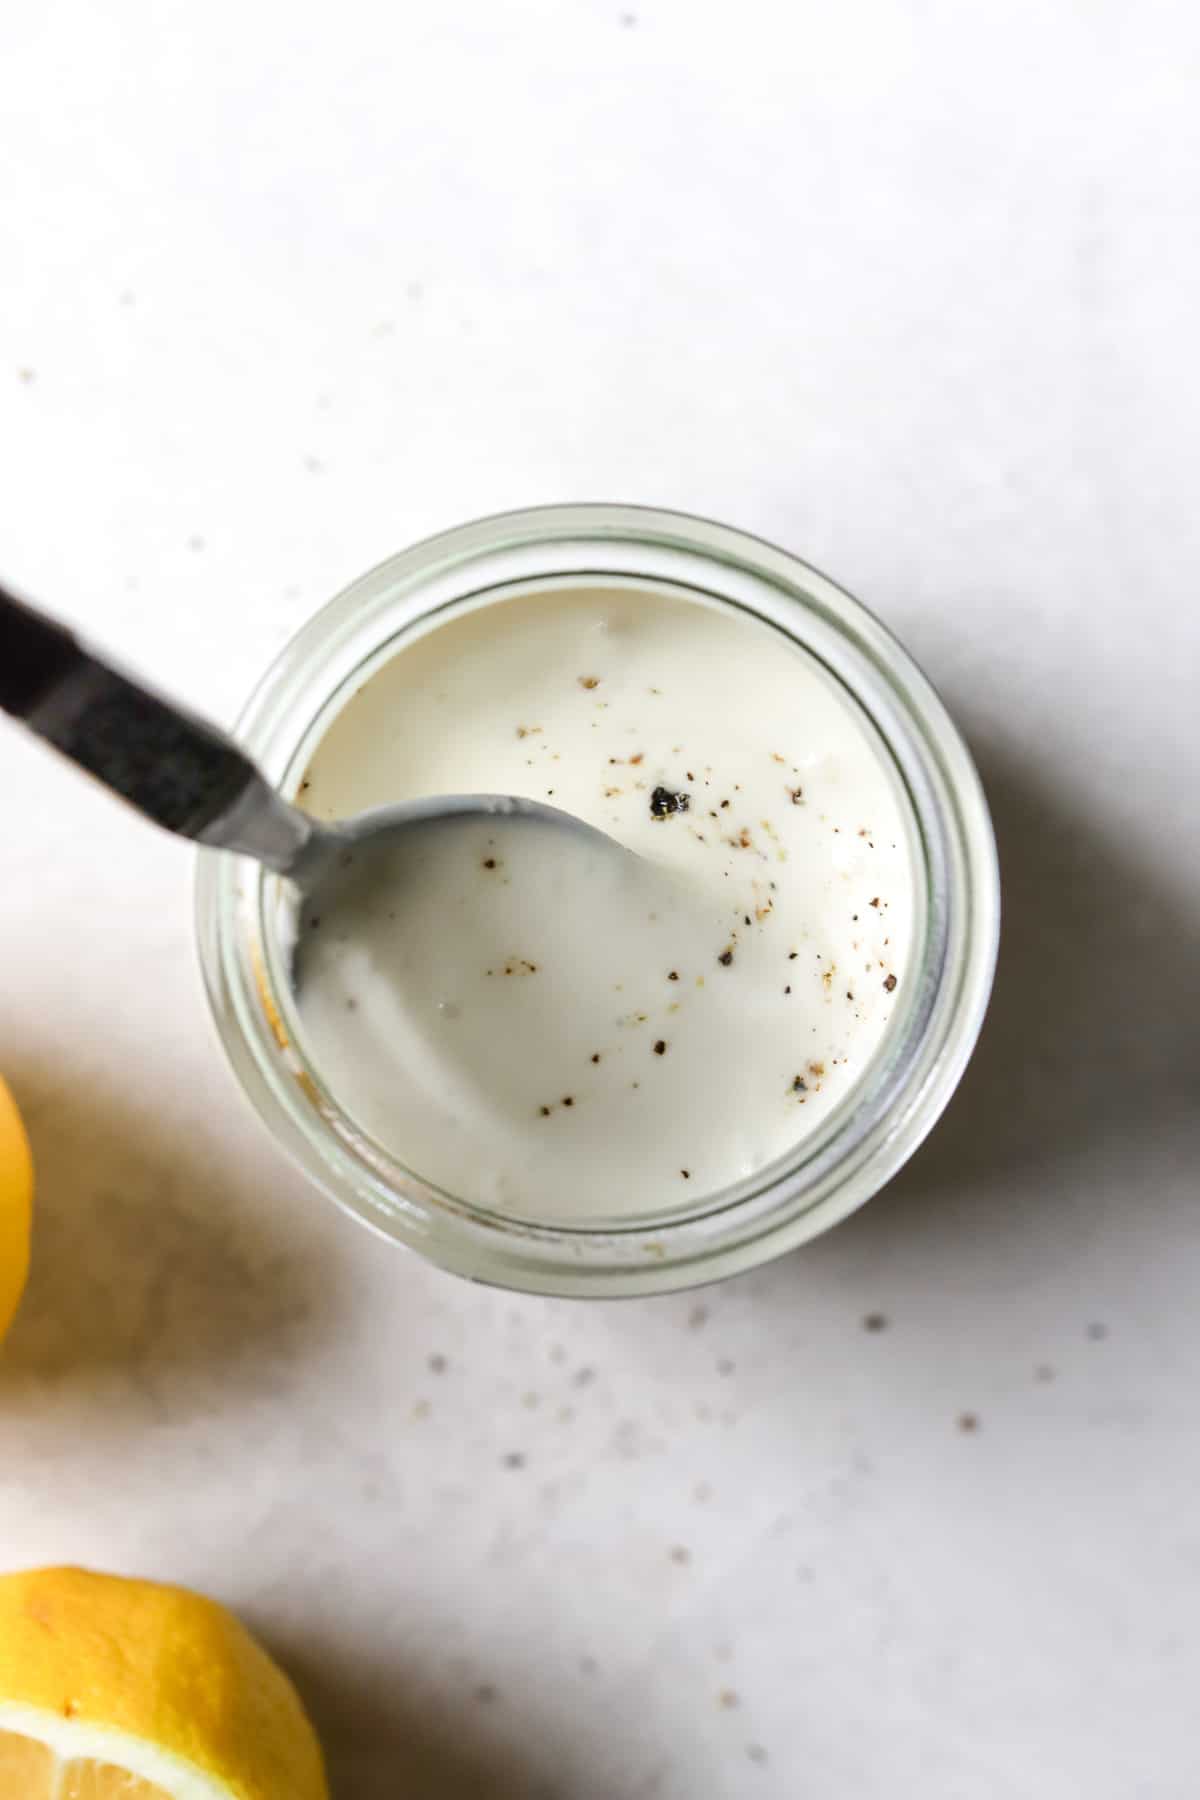 Caesar dressing in small glass jar with freshly cracked pepper on top, being lightly stirred by a spoon, on light gray surface with lemons on side